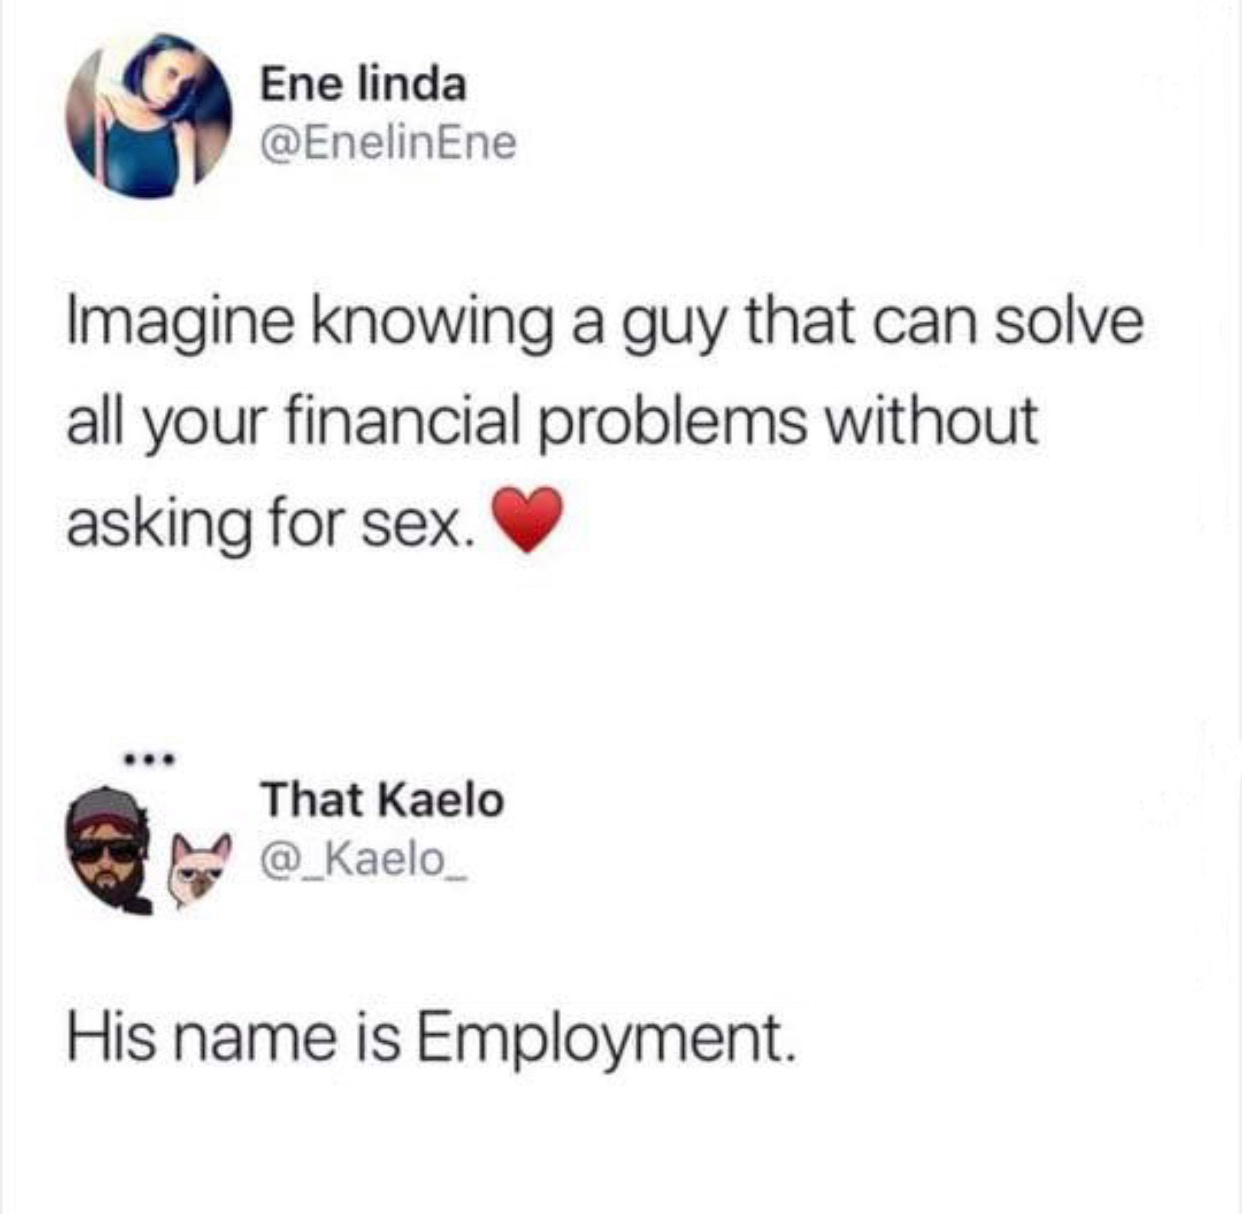 diagram - Ene linda Ene Imagine knowing a guy that can solve all your financial problems without asking for sex. That Kaelo @ Kaelo His name is Employment.